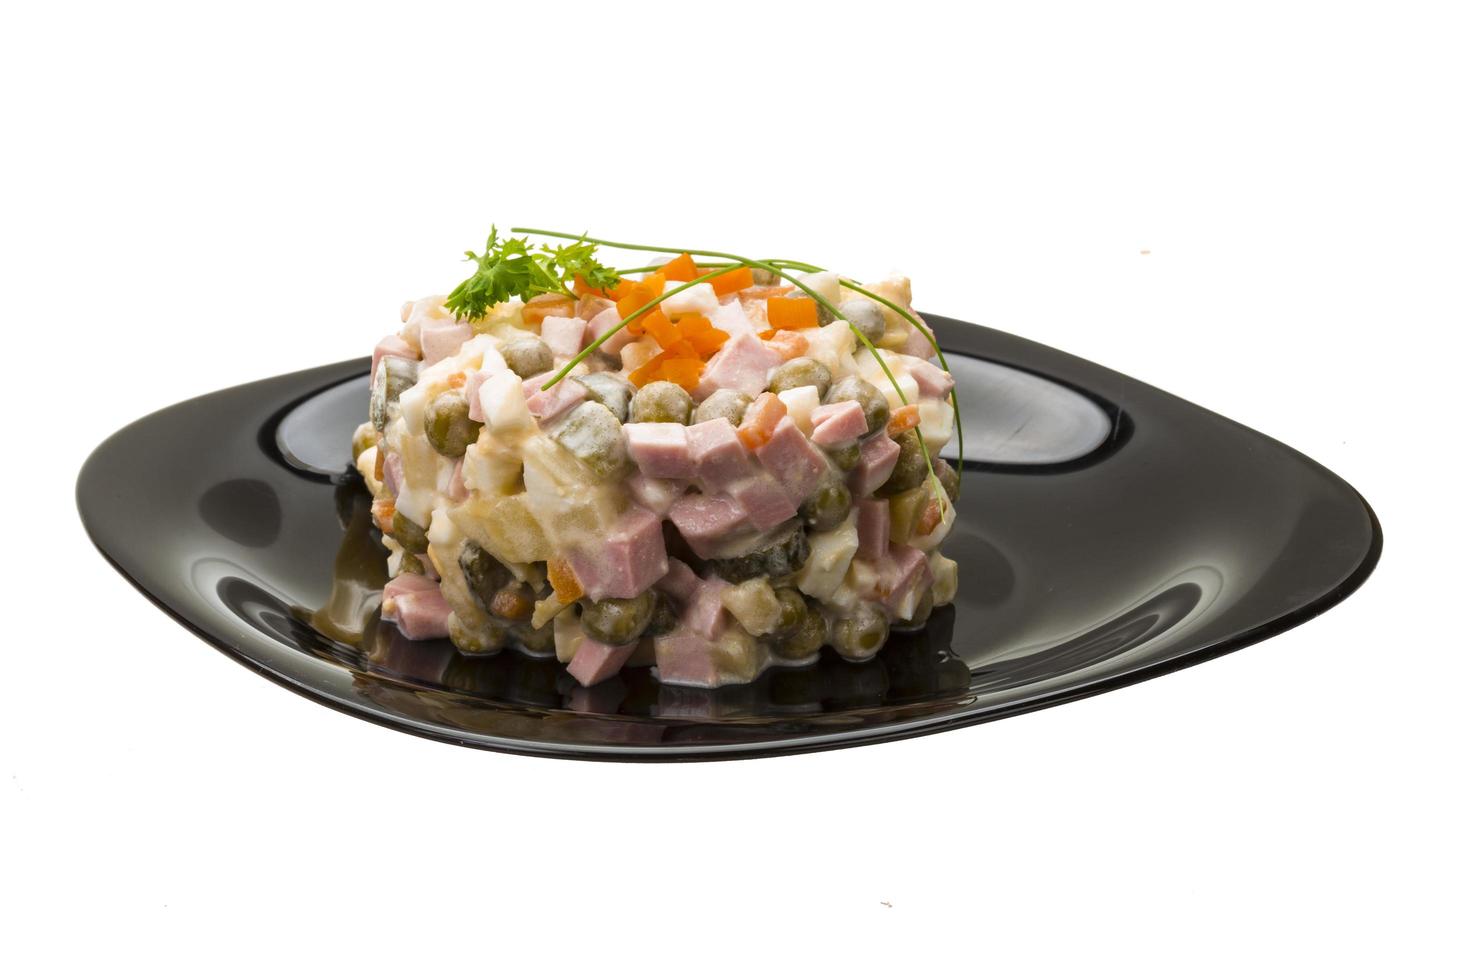 Russian Salad on the plate and white background photo